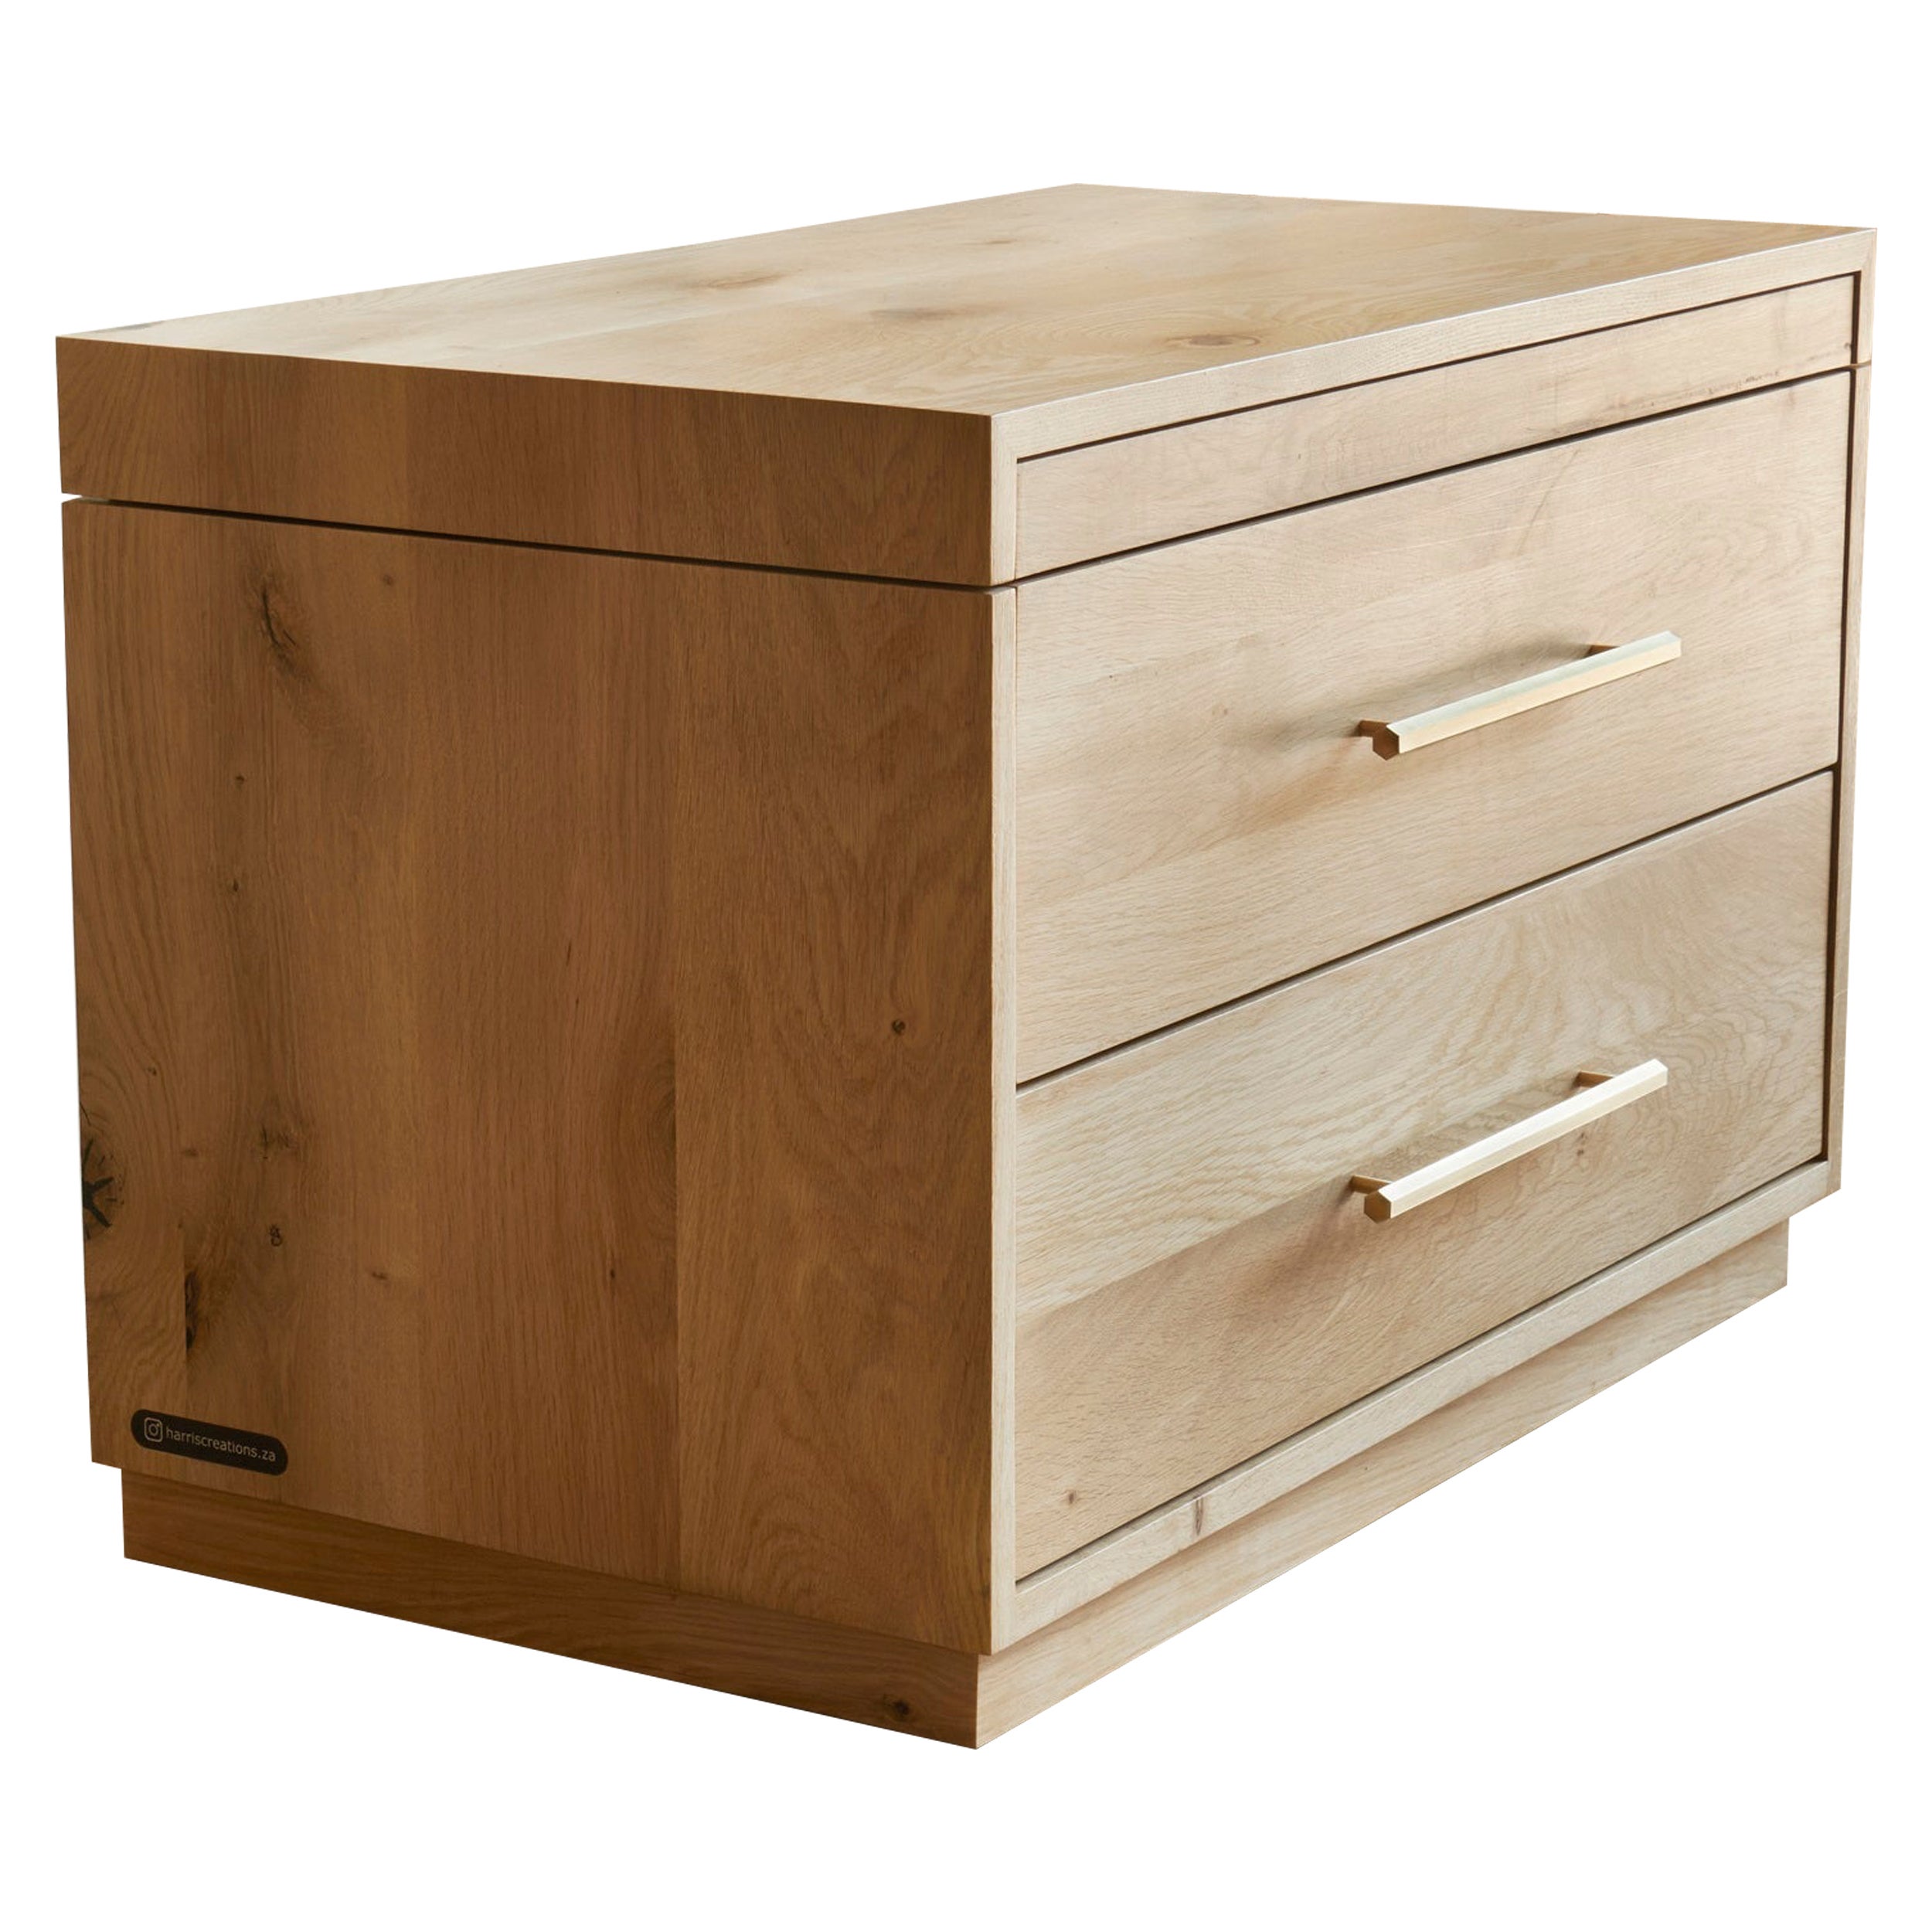  MAXWELL - Multifunctional Pedestals/Bedside Tables 